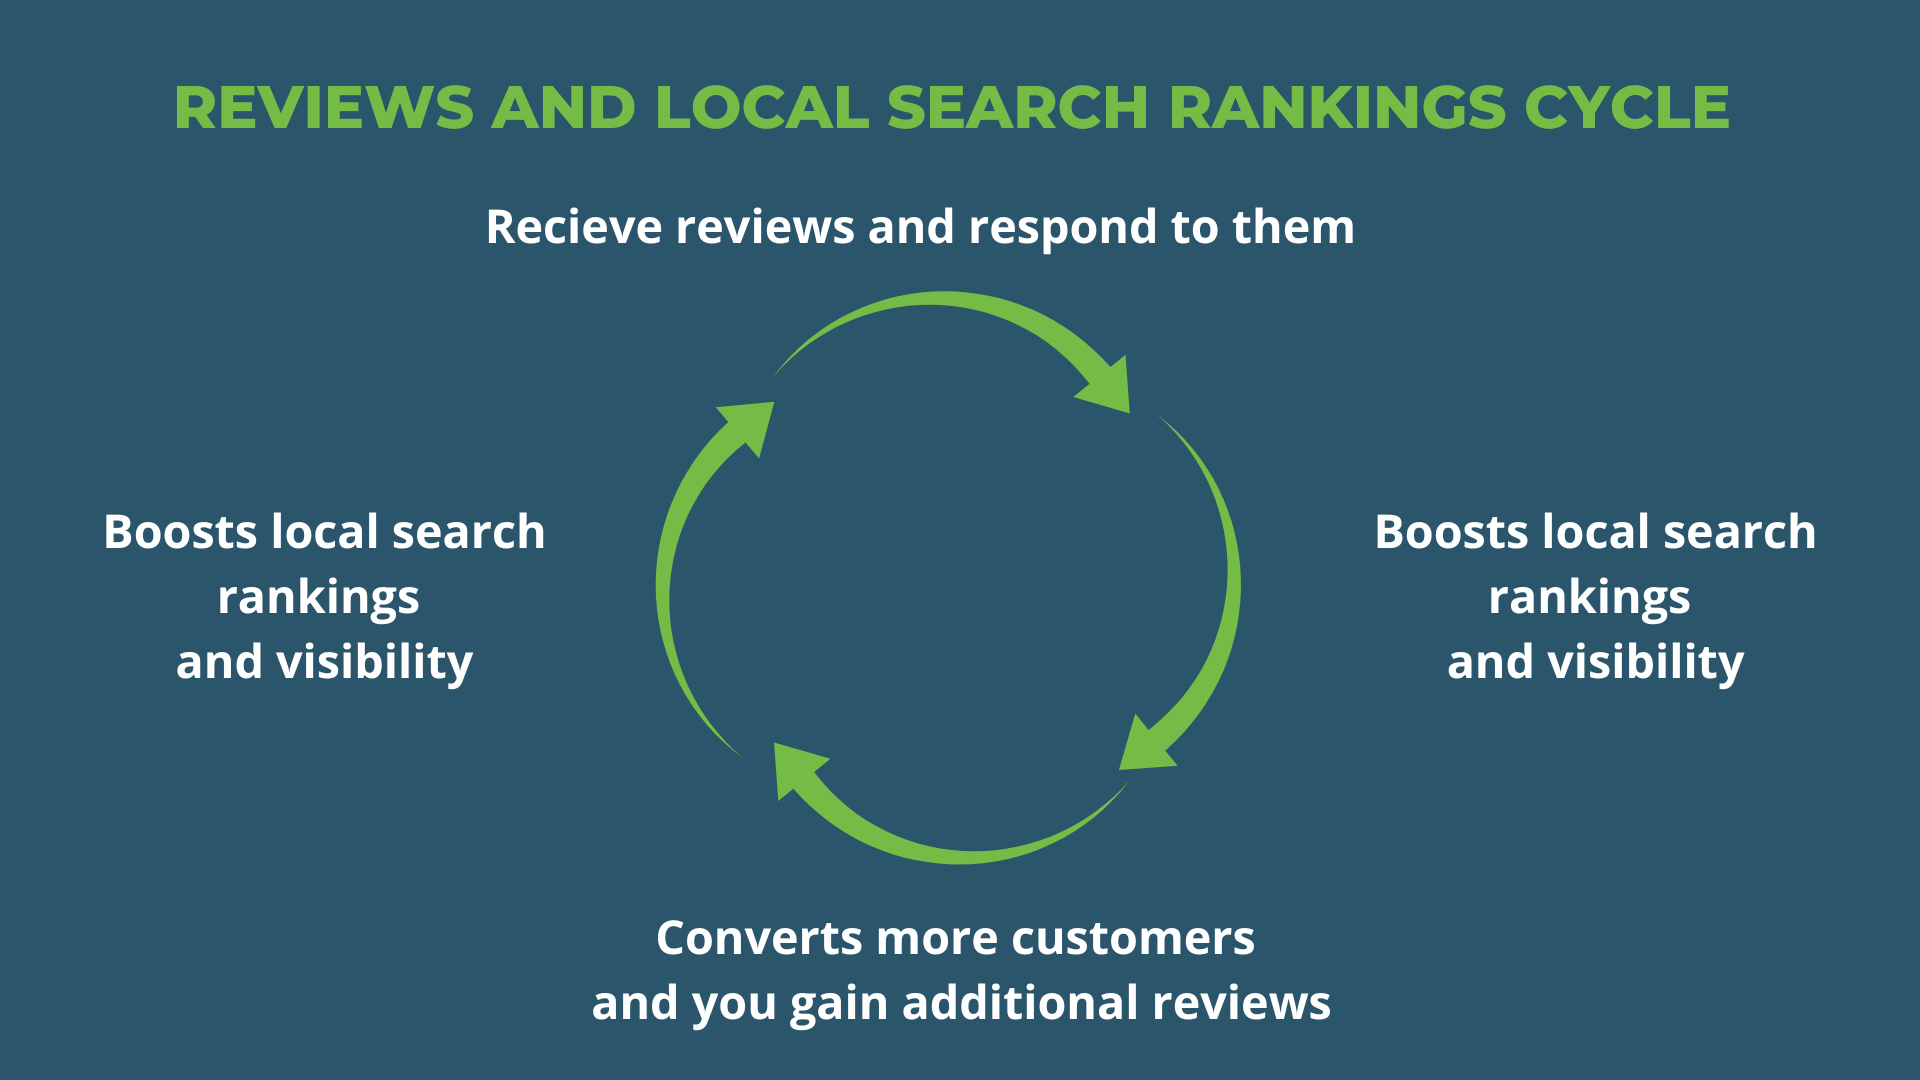 Navy blue background with a green circle made of arrows and white text on the outside showin the cycle or reviews and local search rankings.